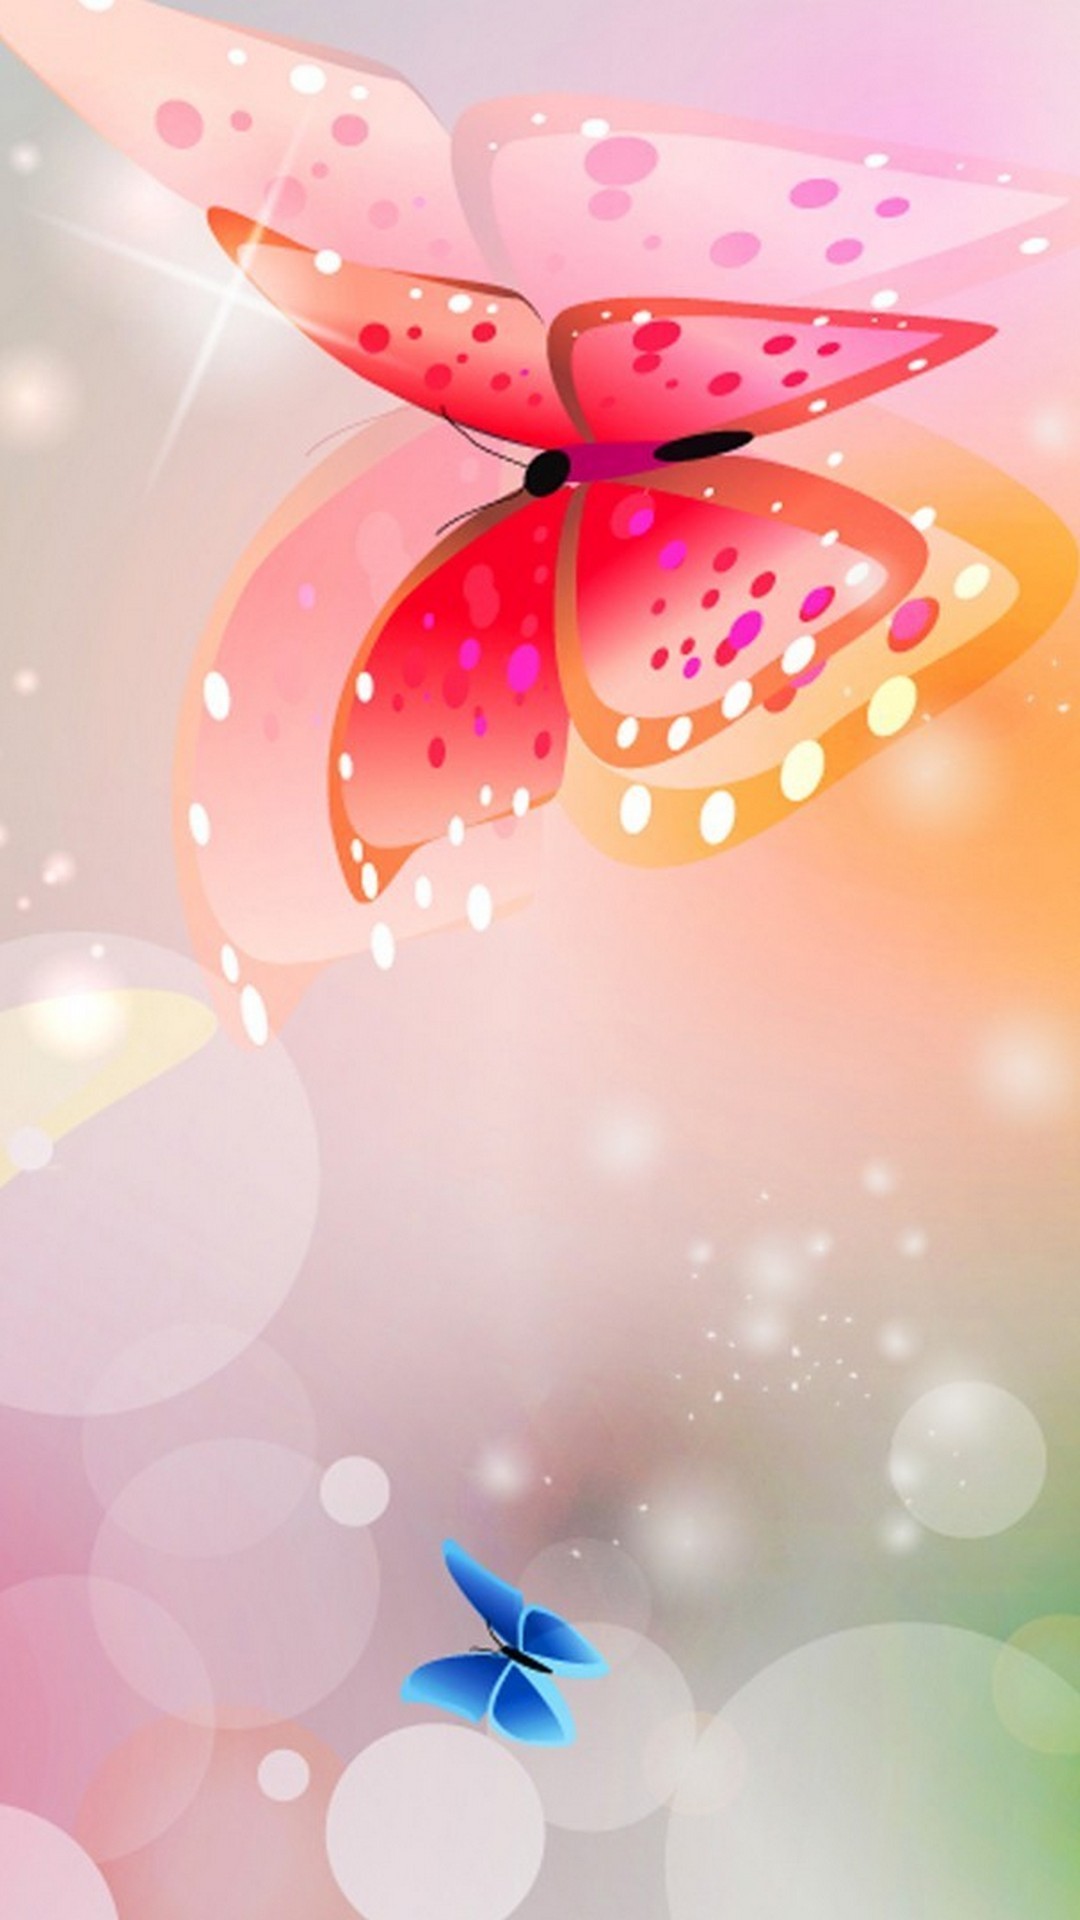 Pink Butterfly Wallpaper For Android with HD resolution 1080x1920